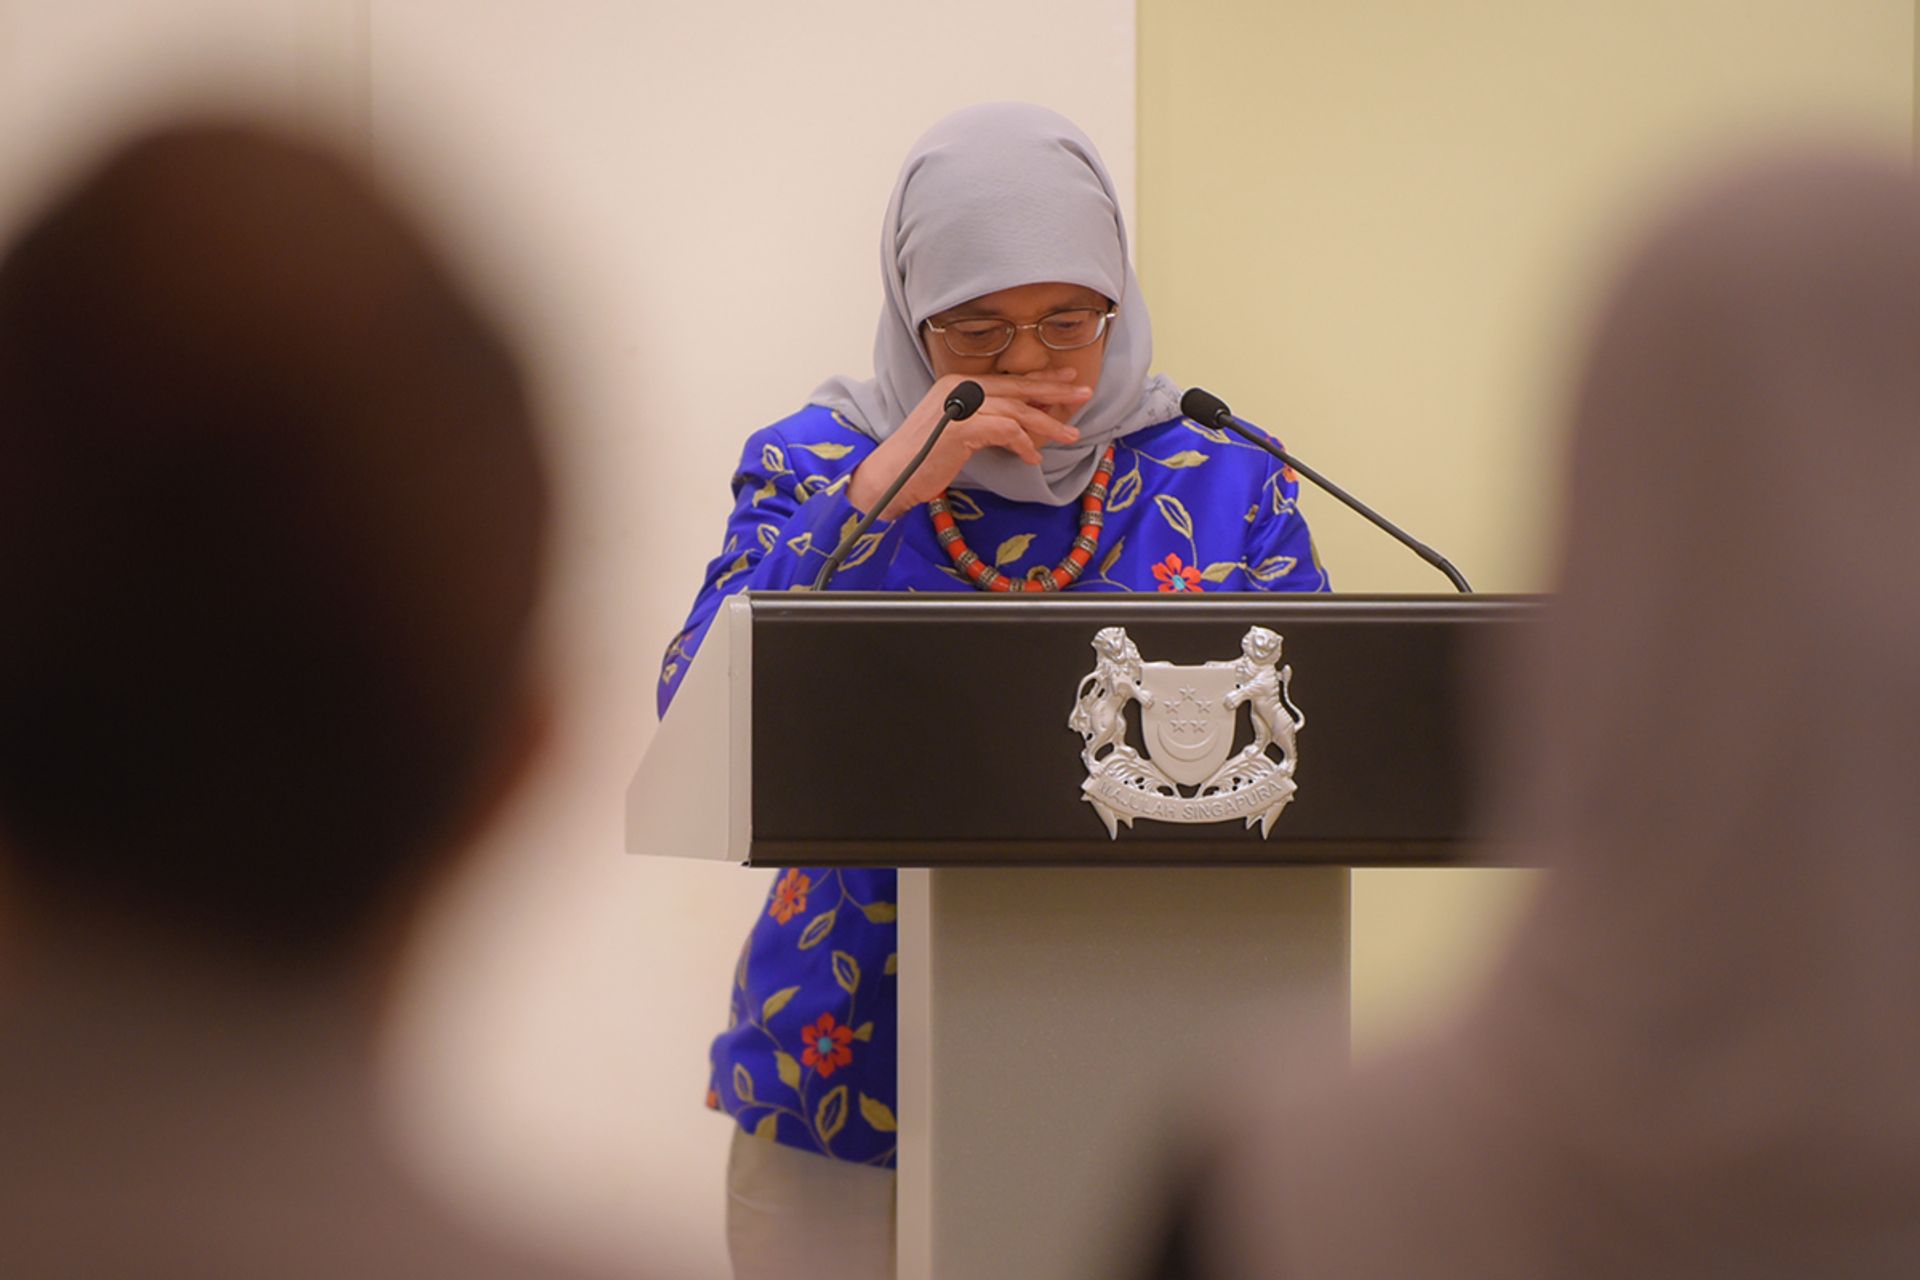 President Halimah tearing up as she speaks during the appreciation event for Covid-19 service workers as part of the third instalment of the #ServingSG series, at the Istana on Jan 27, 2022. ST PHOTO: MARK CHEONG